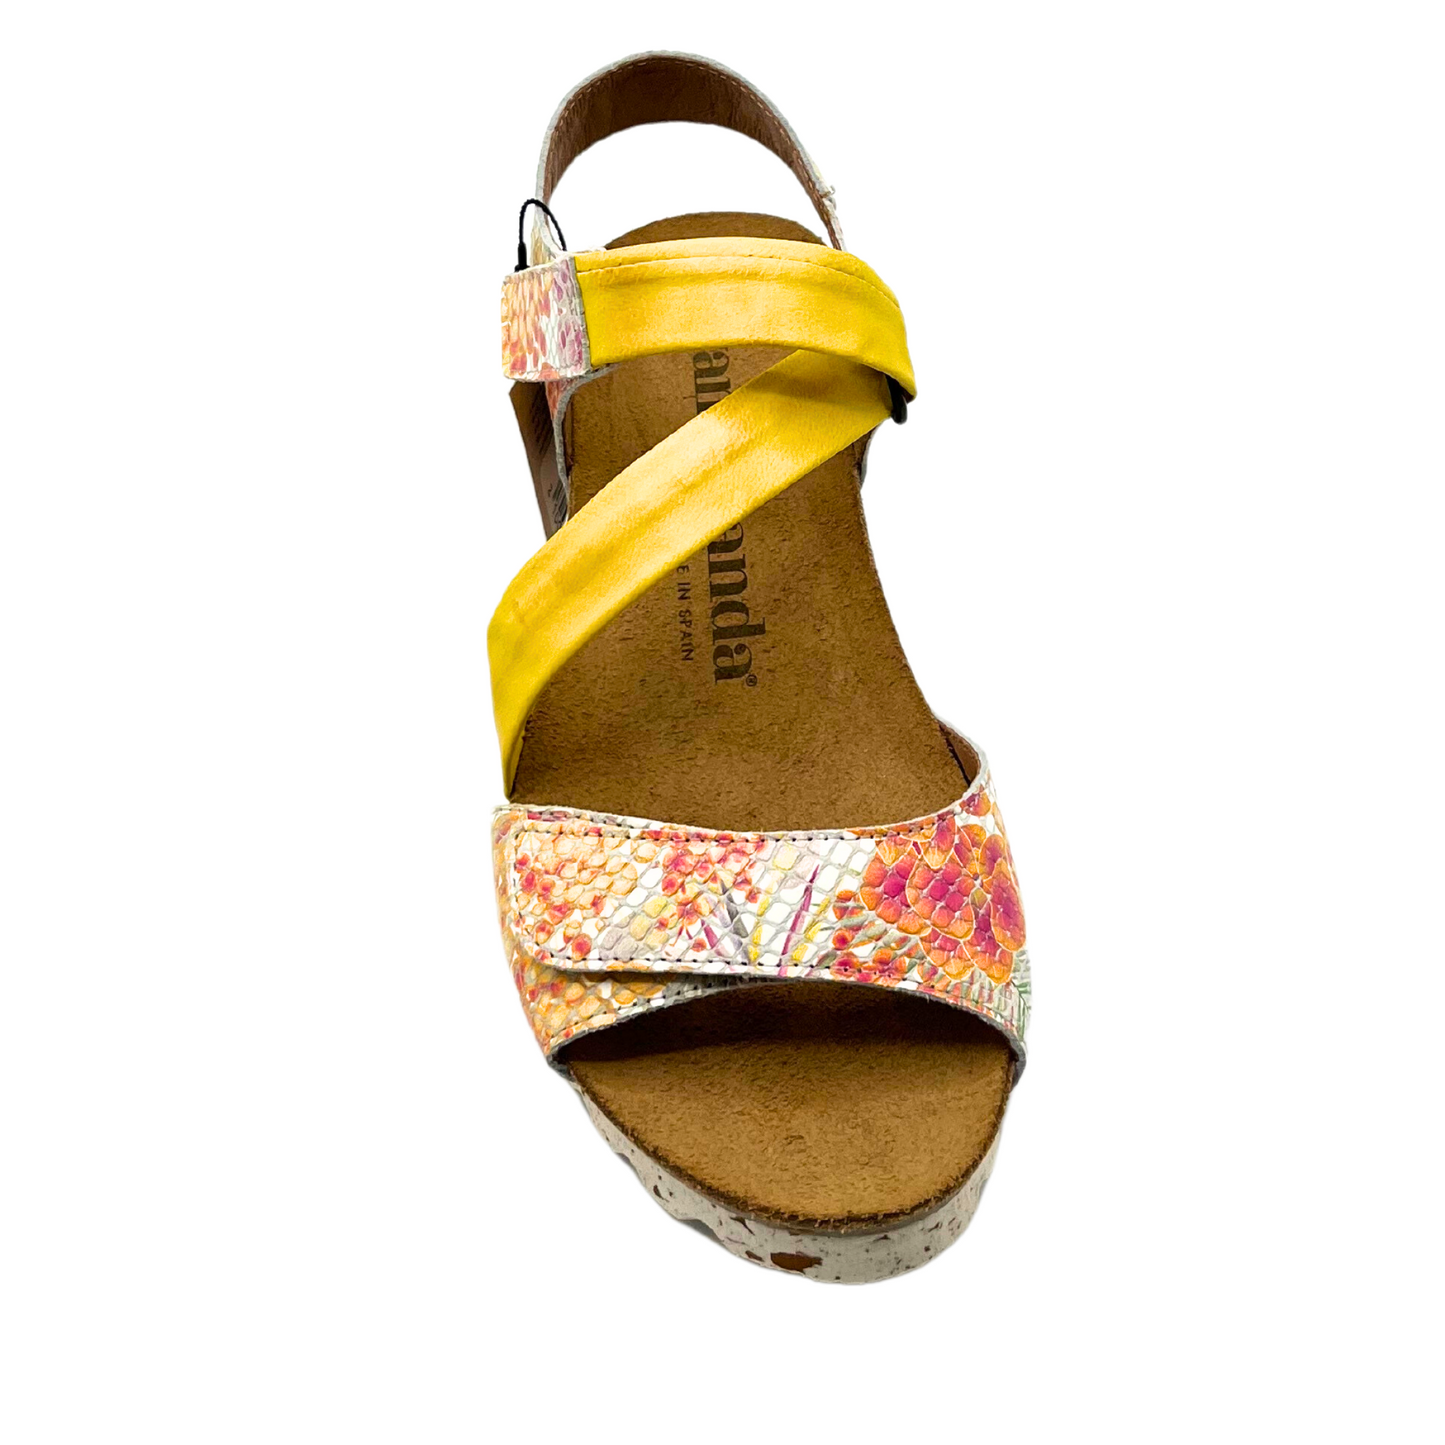 Top down view of a summer sandal in a fun yellow and floral pattern.